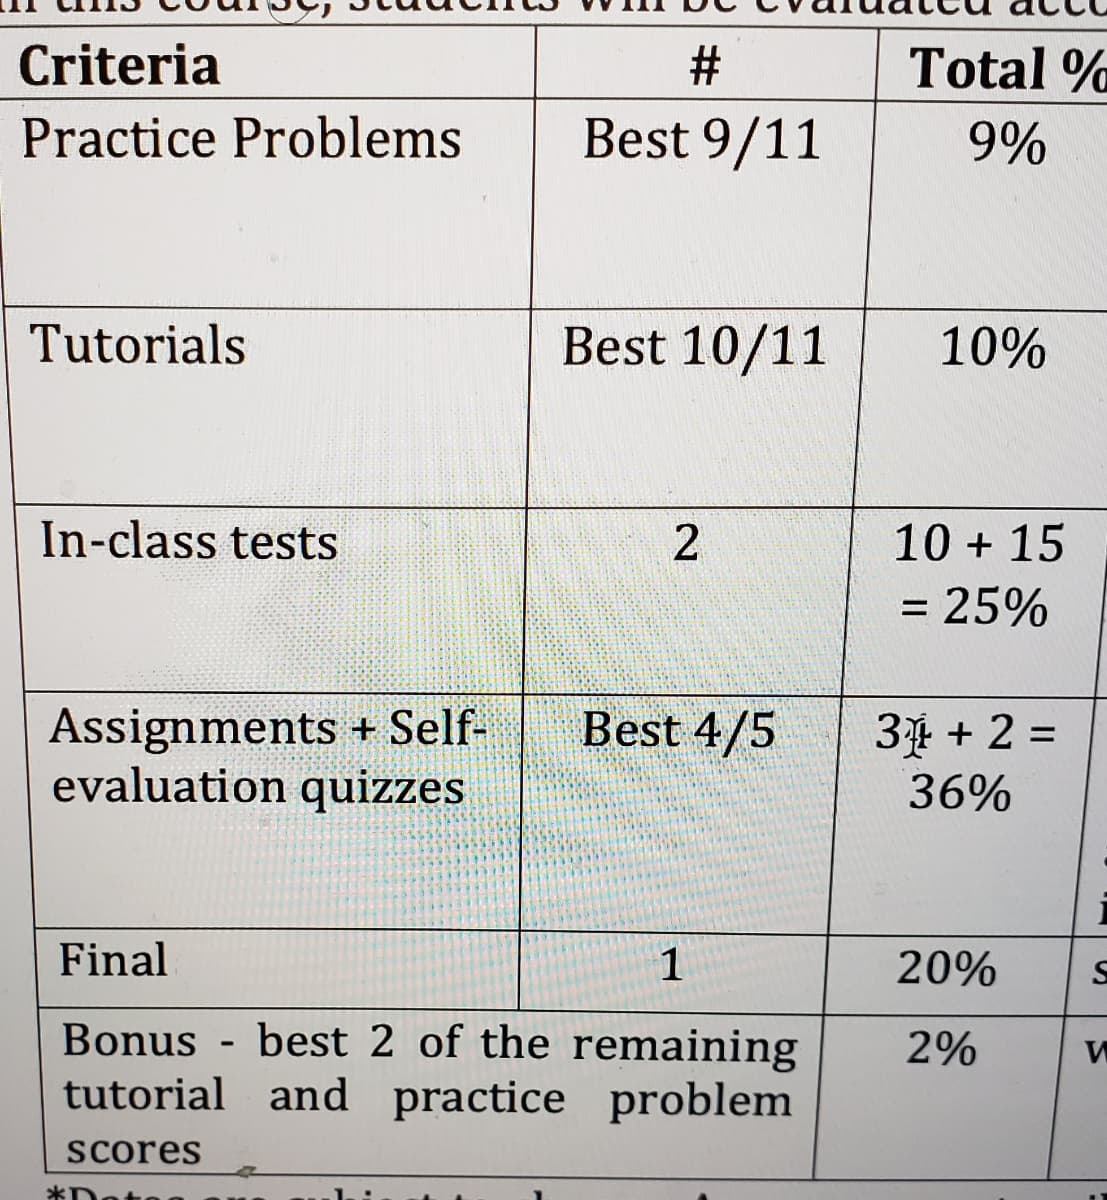 Criteria
Practice Problems
Tutorials
In-class tests
Assignments + Self-
evaluation quizzes
#
Best 9/11
*1
Best 10/11
2
Best 4/5
Final
1
Bonus - best 2 of the remaining
tutorial and practice problem
scores
Total%
9%
10%
10 + 15
= 25%
3 + 2 =
36%
20%
2%
S
W